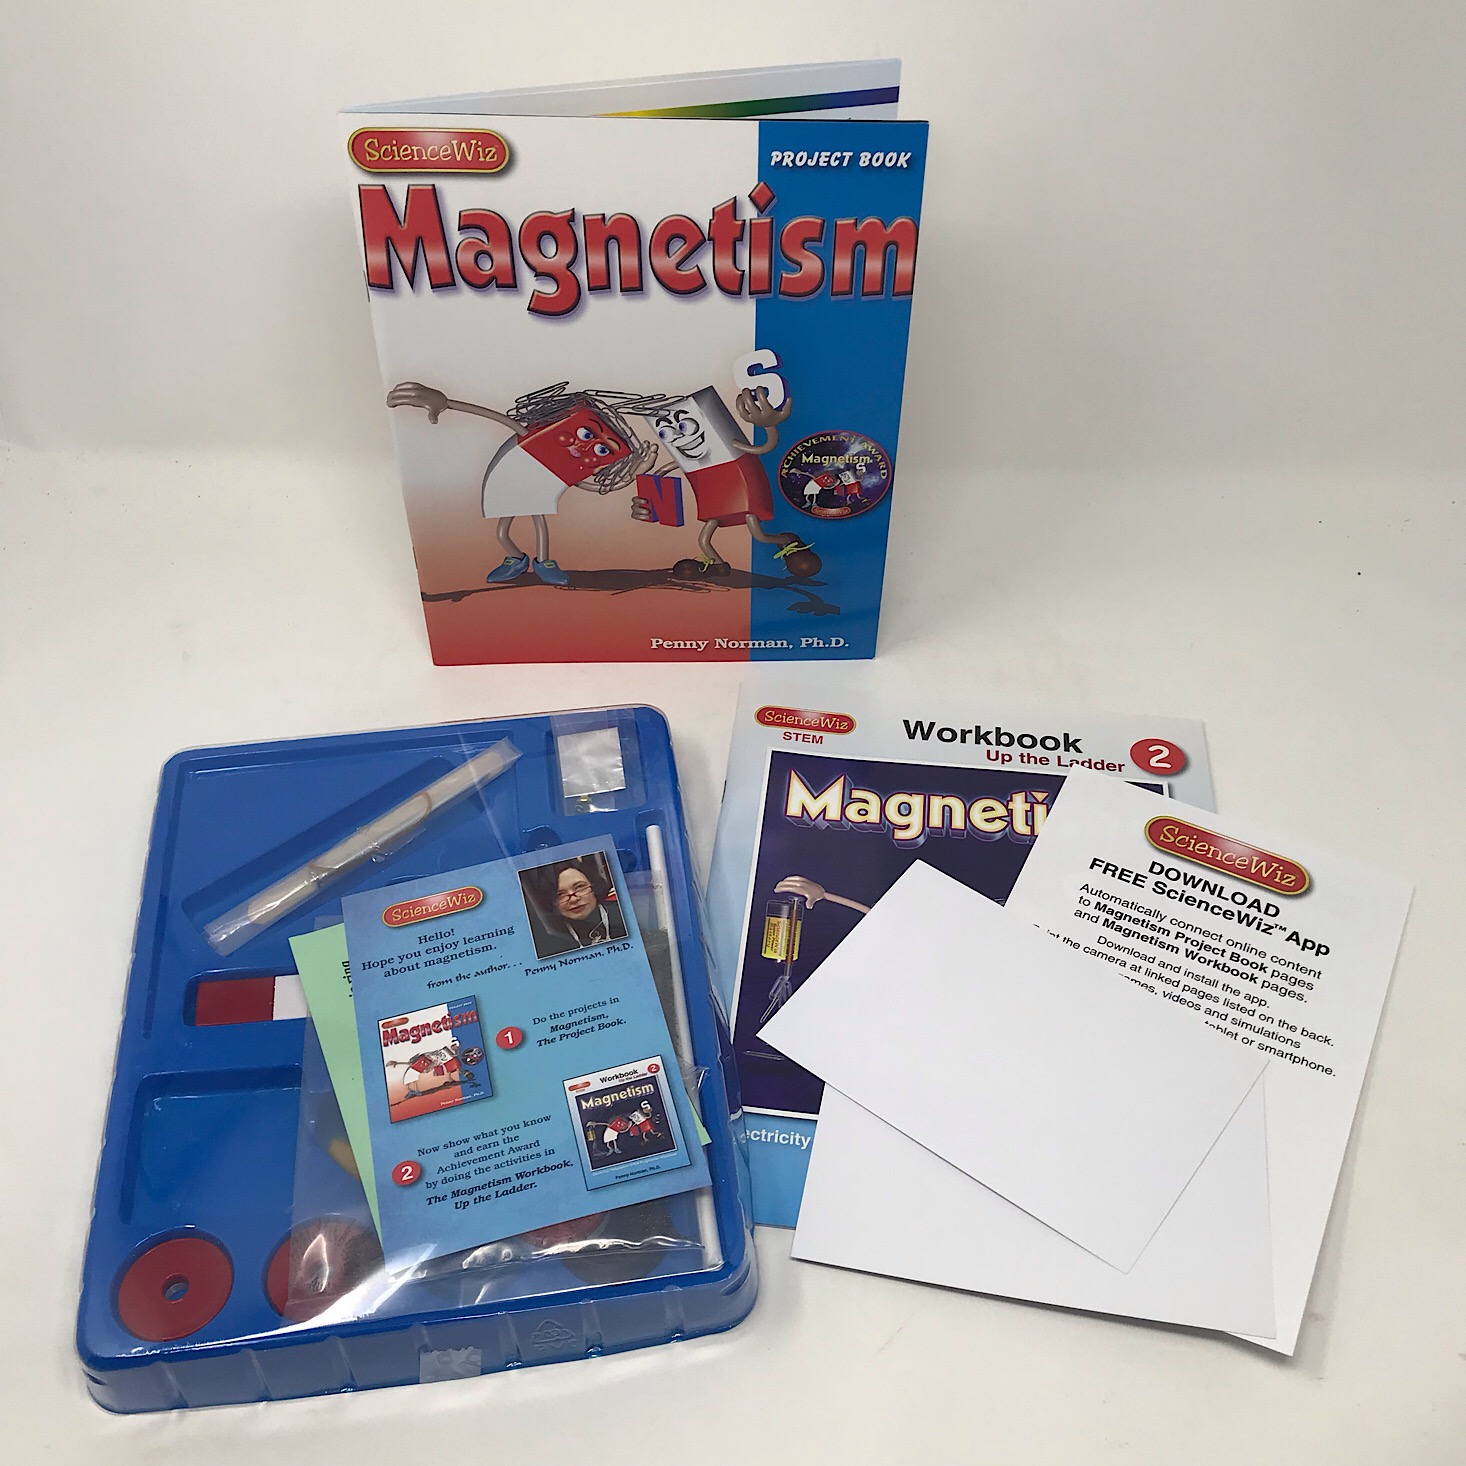 Amazon STEM Toy Club Review, Ages 5-7: Science Wiz Magnetism Set